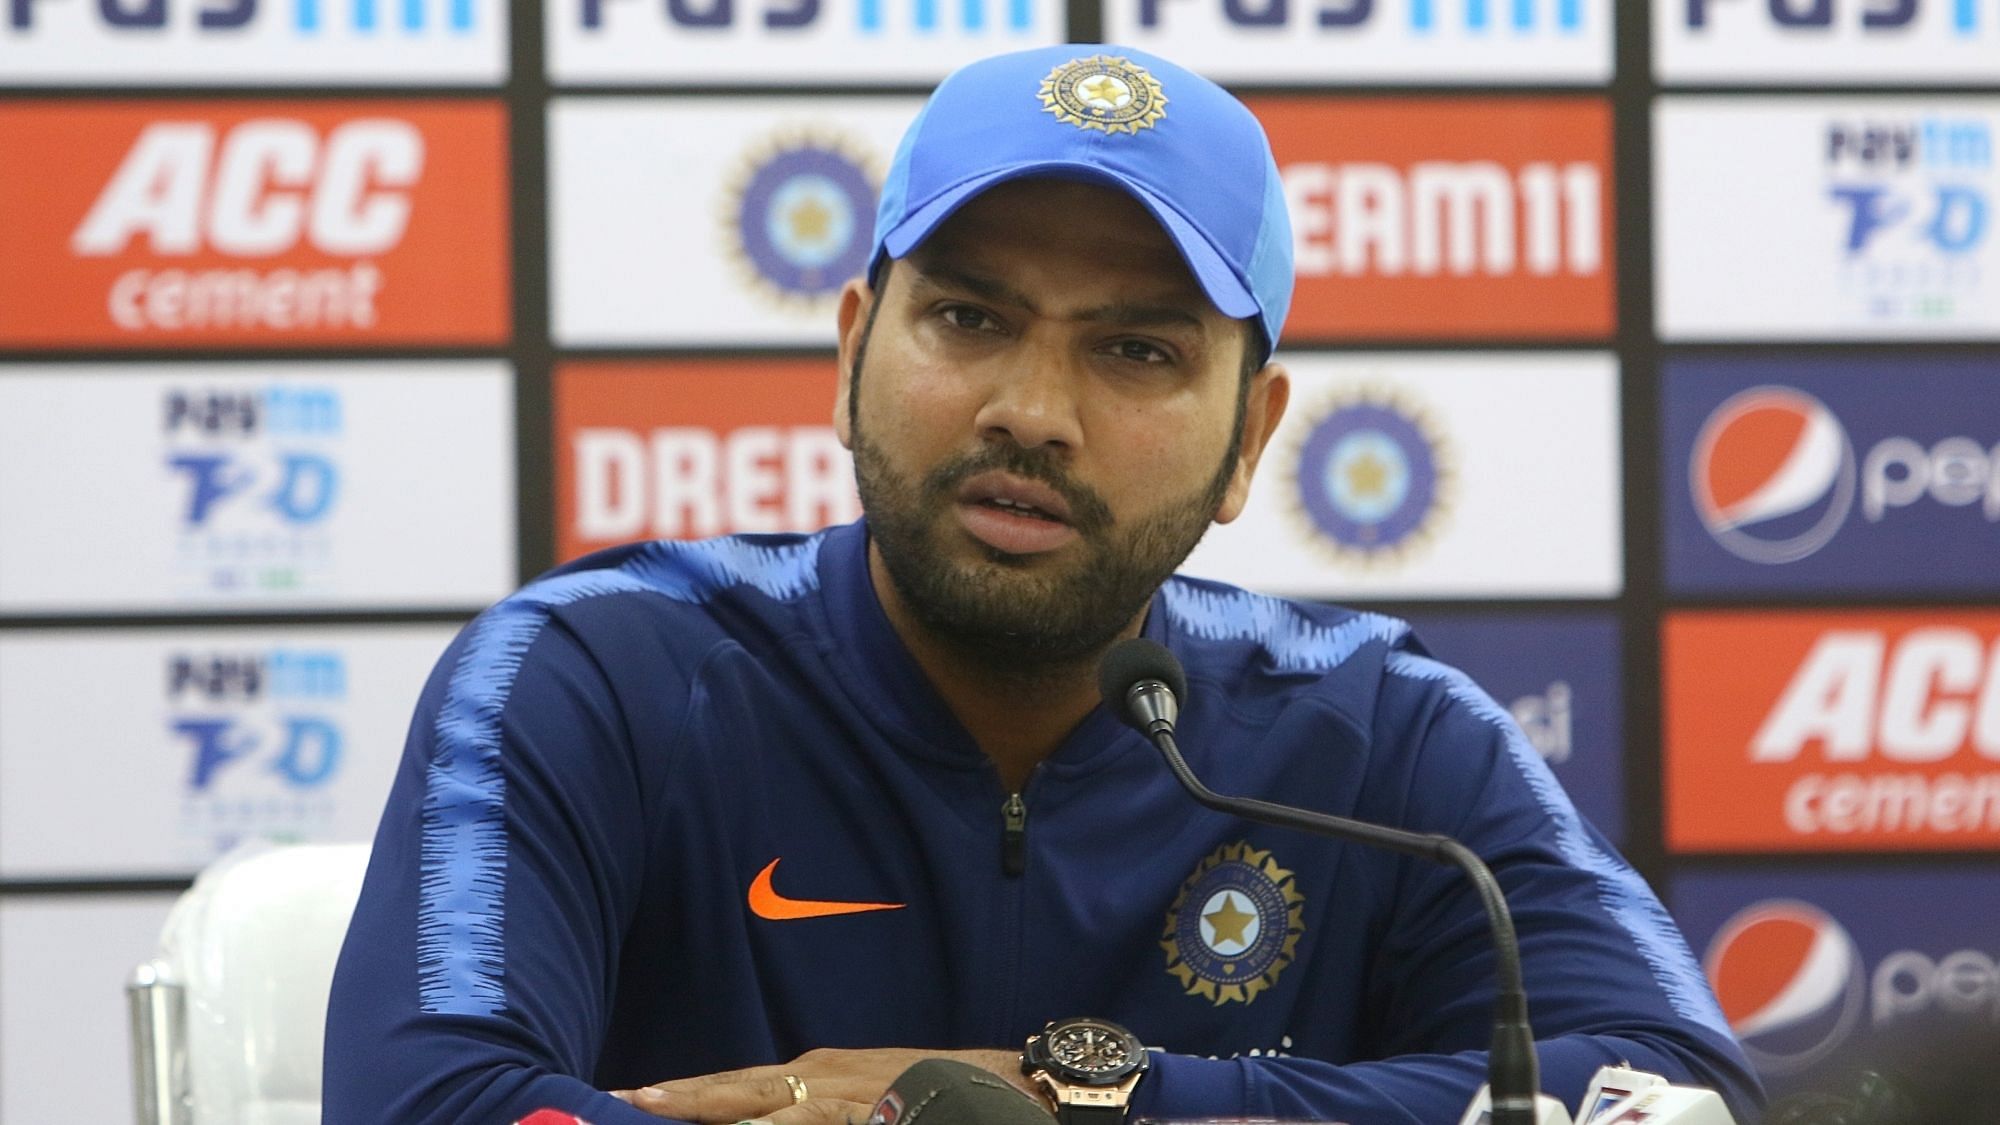 Rohit Sharma is set to become India’s number one appearance maker in T20Is.